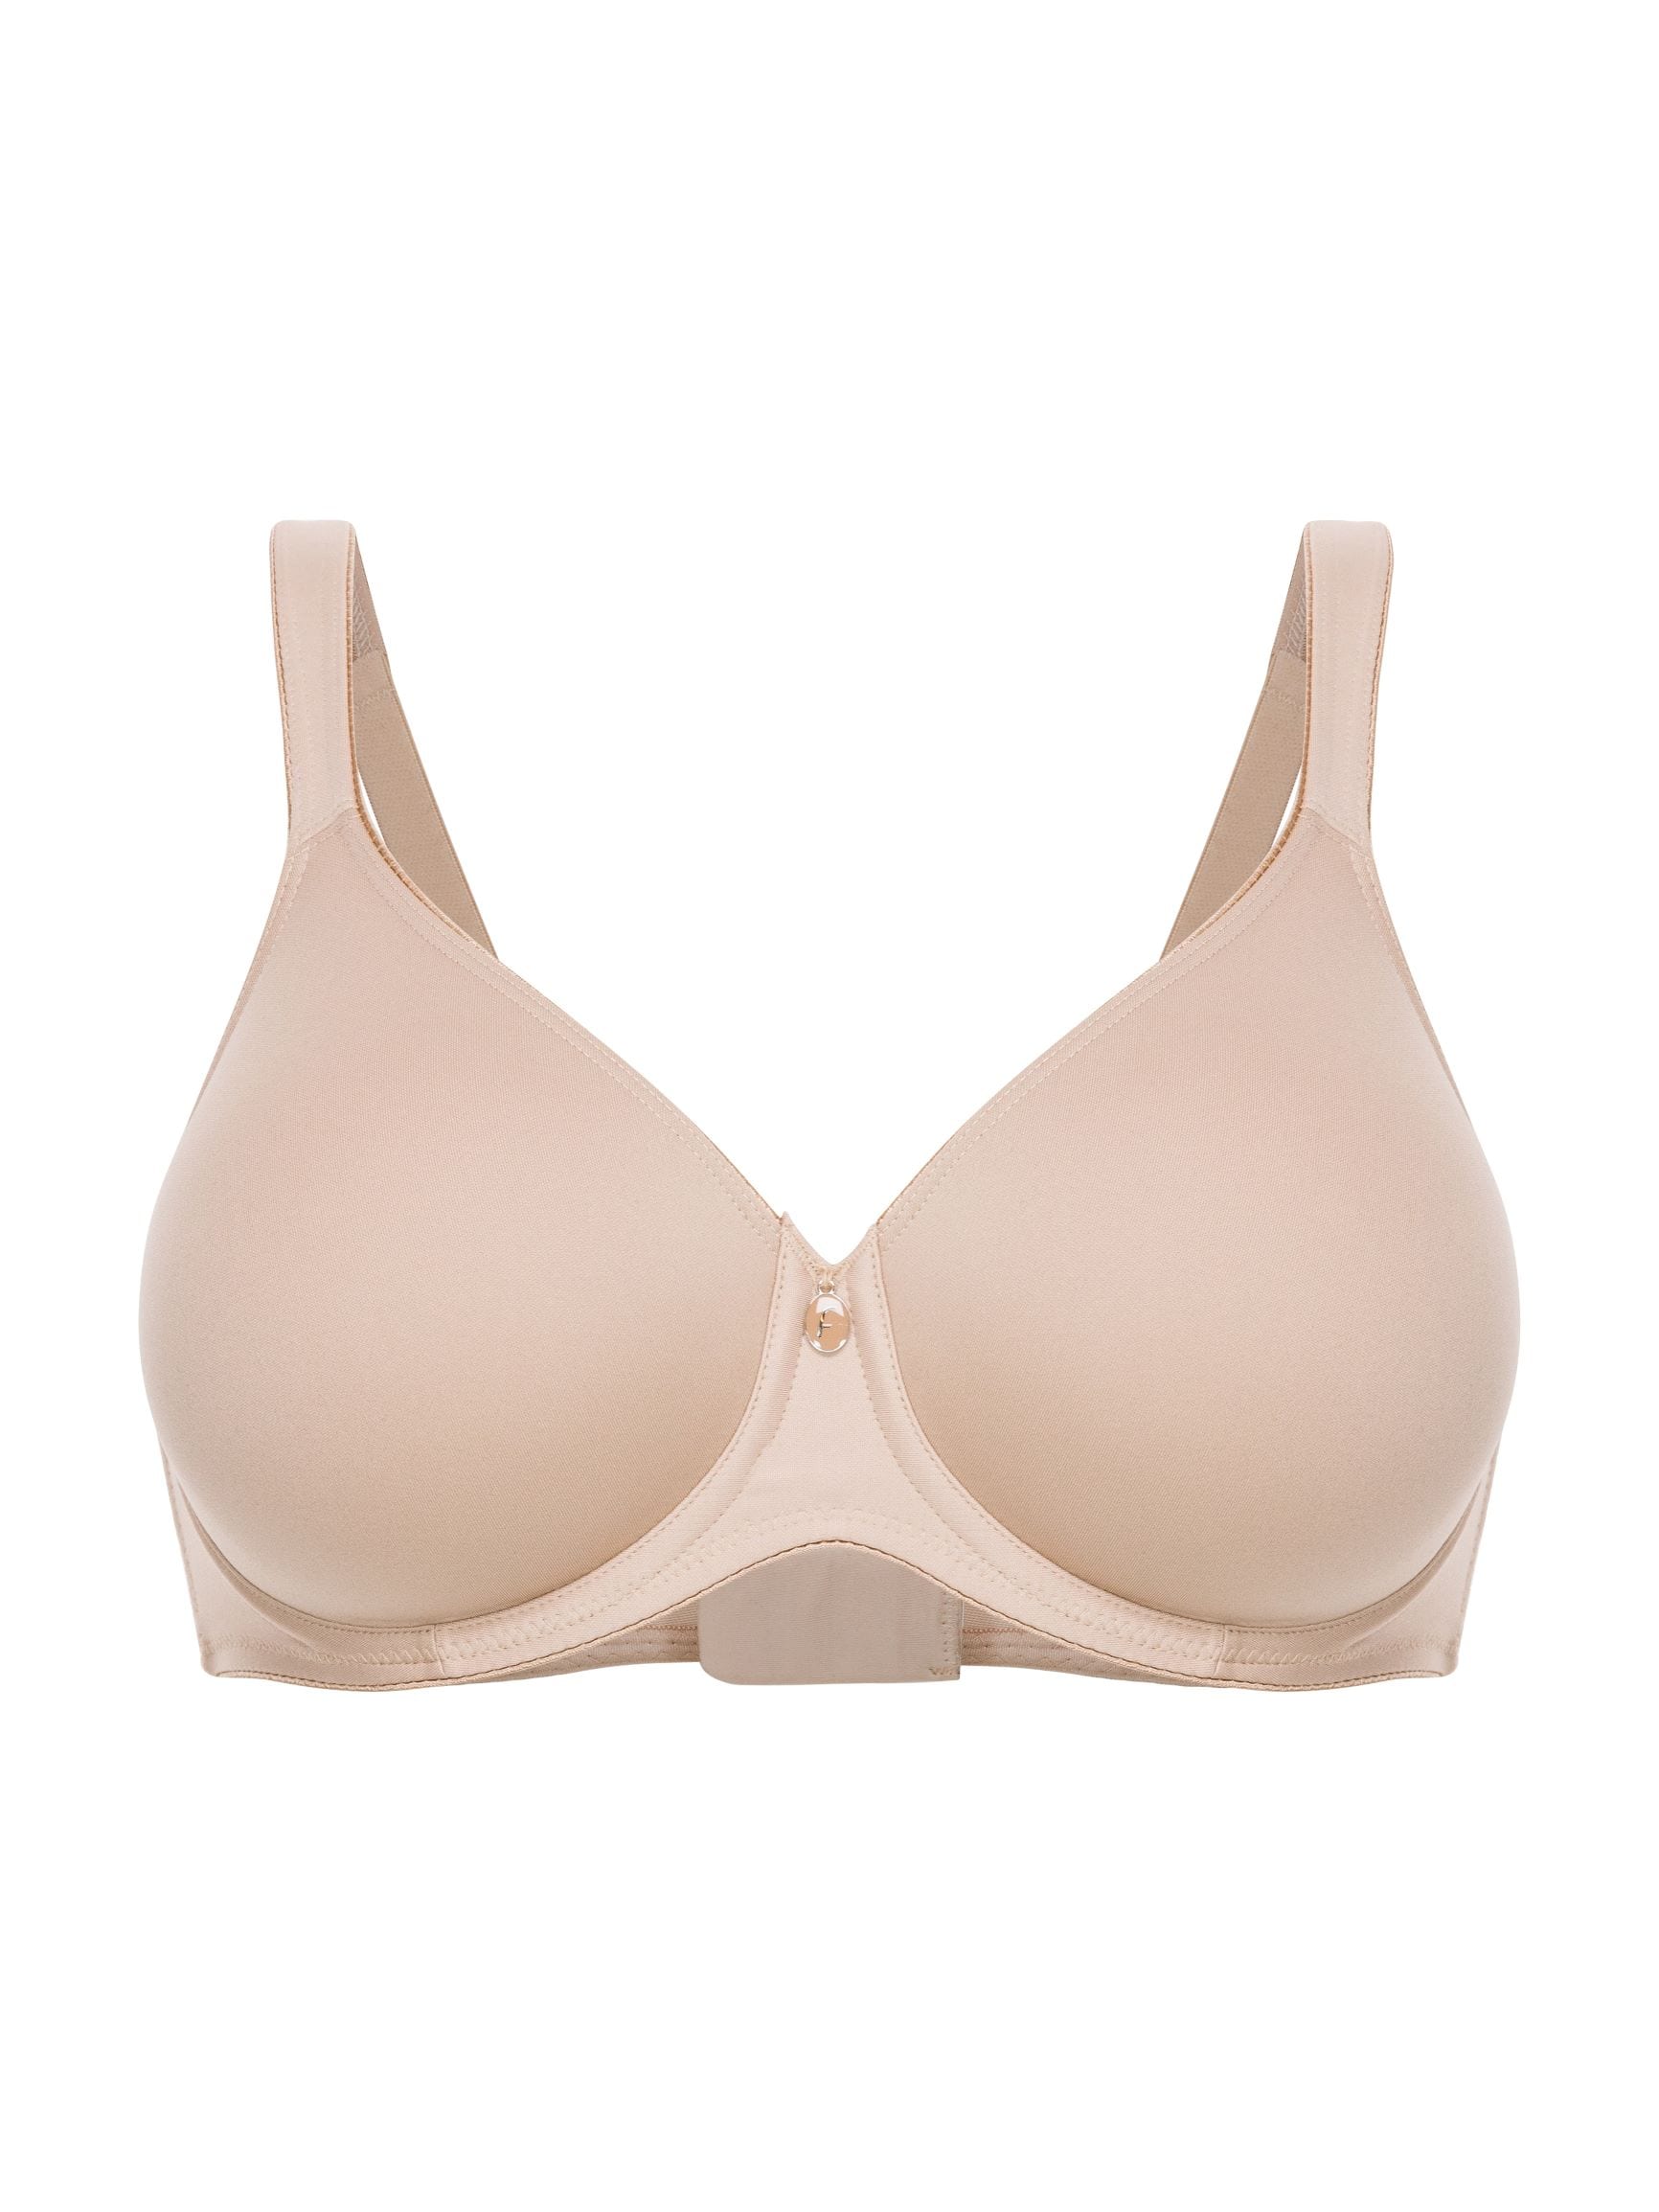 Felina Conturelle Provence wired bra 528 PORCELAIN ROSE buy for the best  price CAD$ 164.00 - Canada and U.S. delivery – Bralissimo